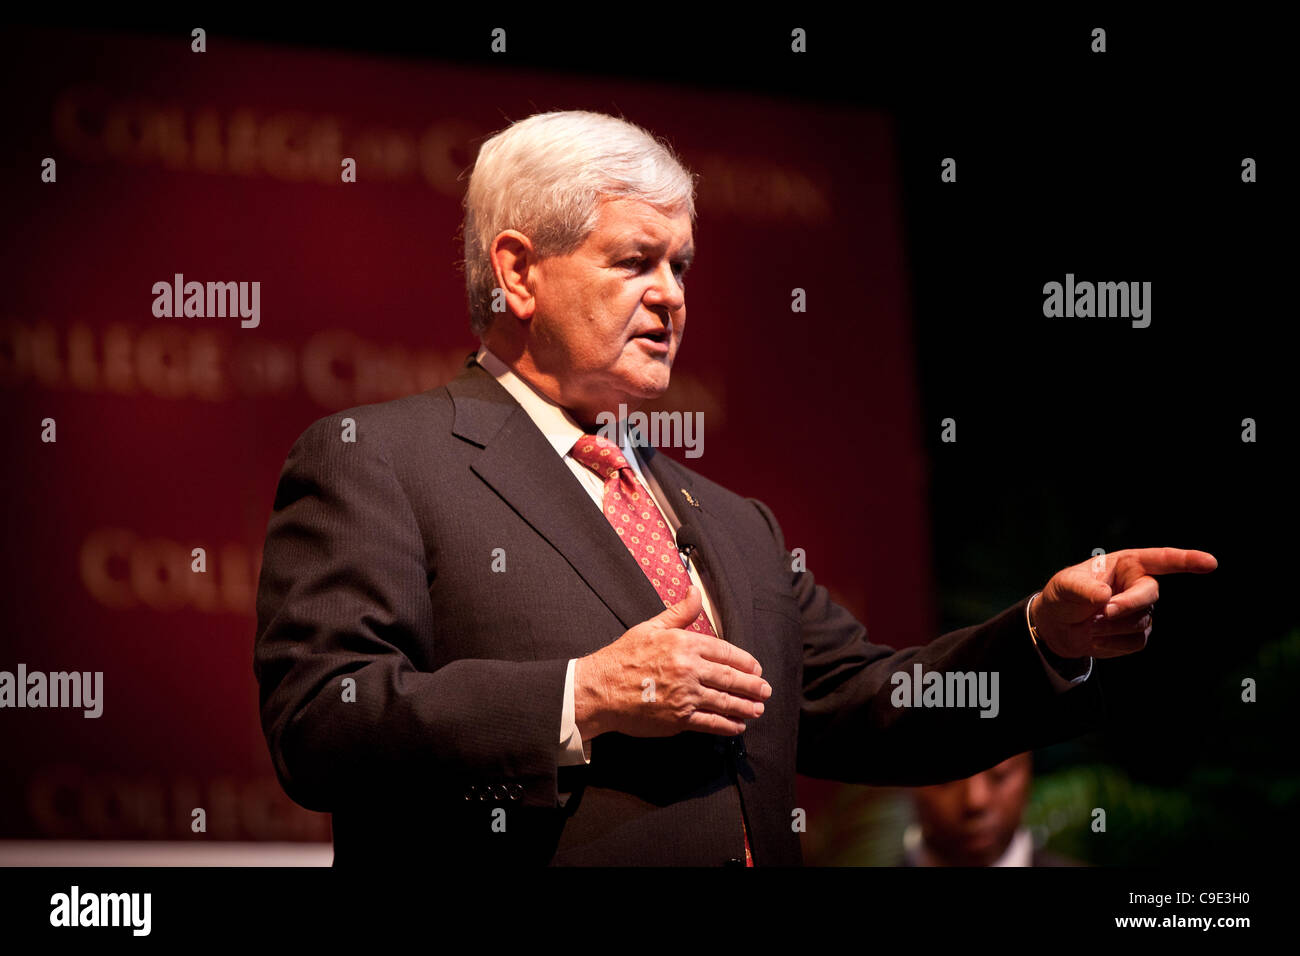 Republican presidential candidate Newt Gingrich at a townhall meeting at the College of Charleston on November 28, 2011 in Charleston, South Carolina.  The event is hosted by Republican Rep. Tim Scott. Stock Photo